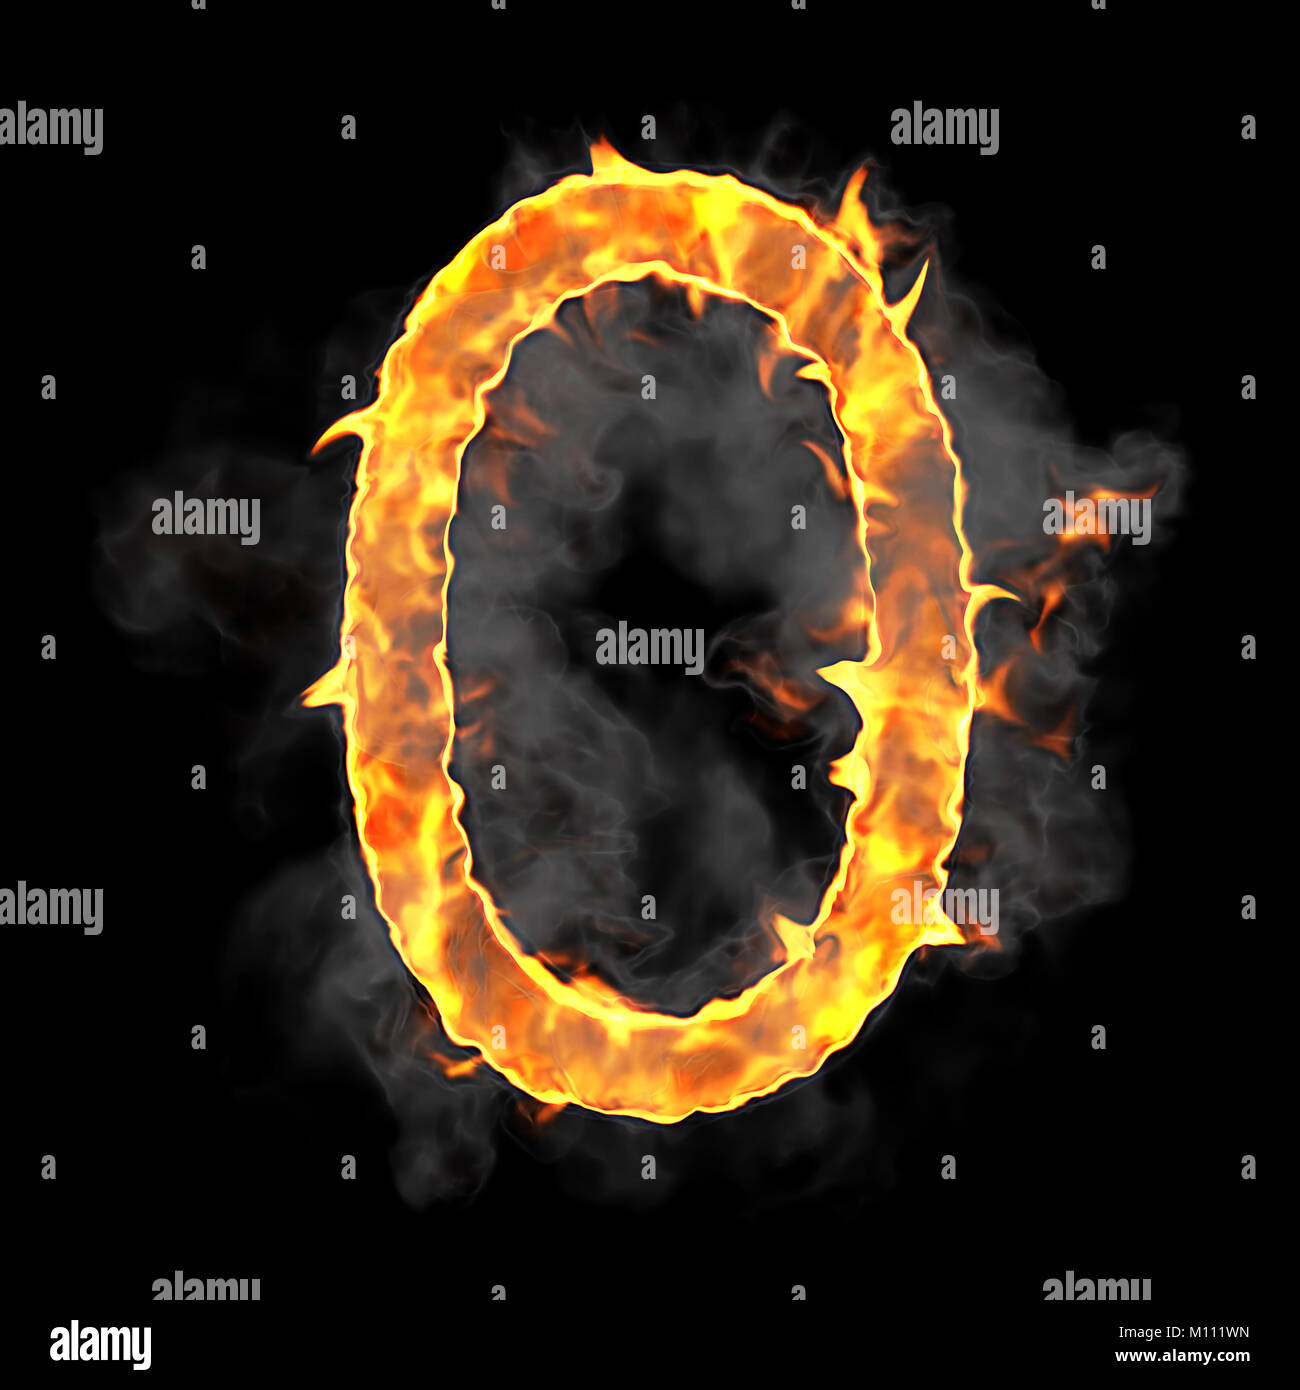 Burning And Flame Font 0 Numeral Over Black Background Stock Photo Alamy